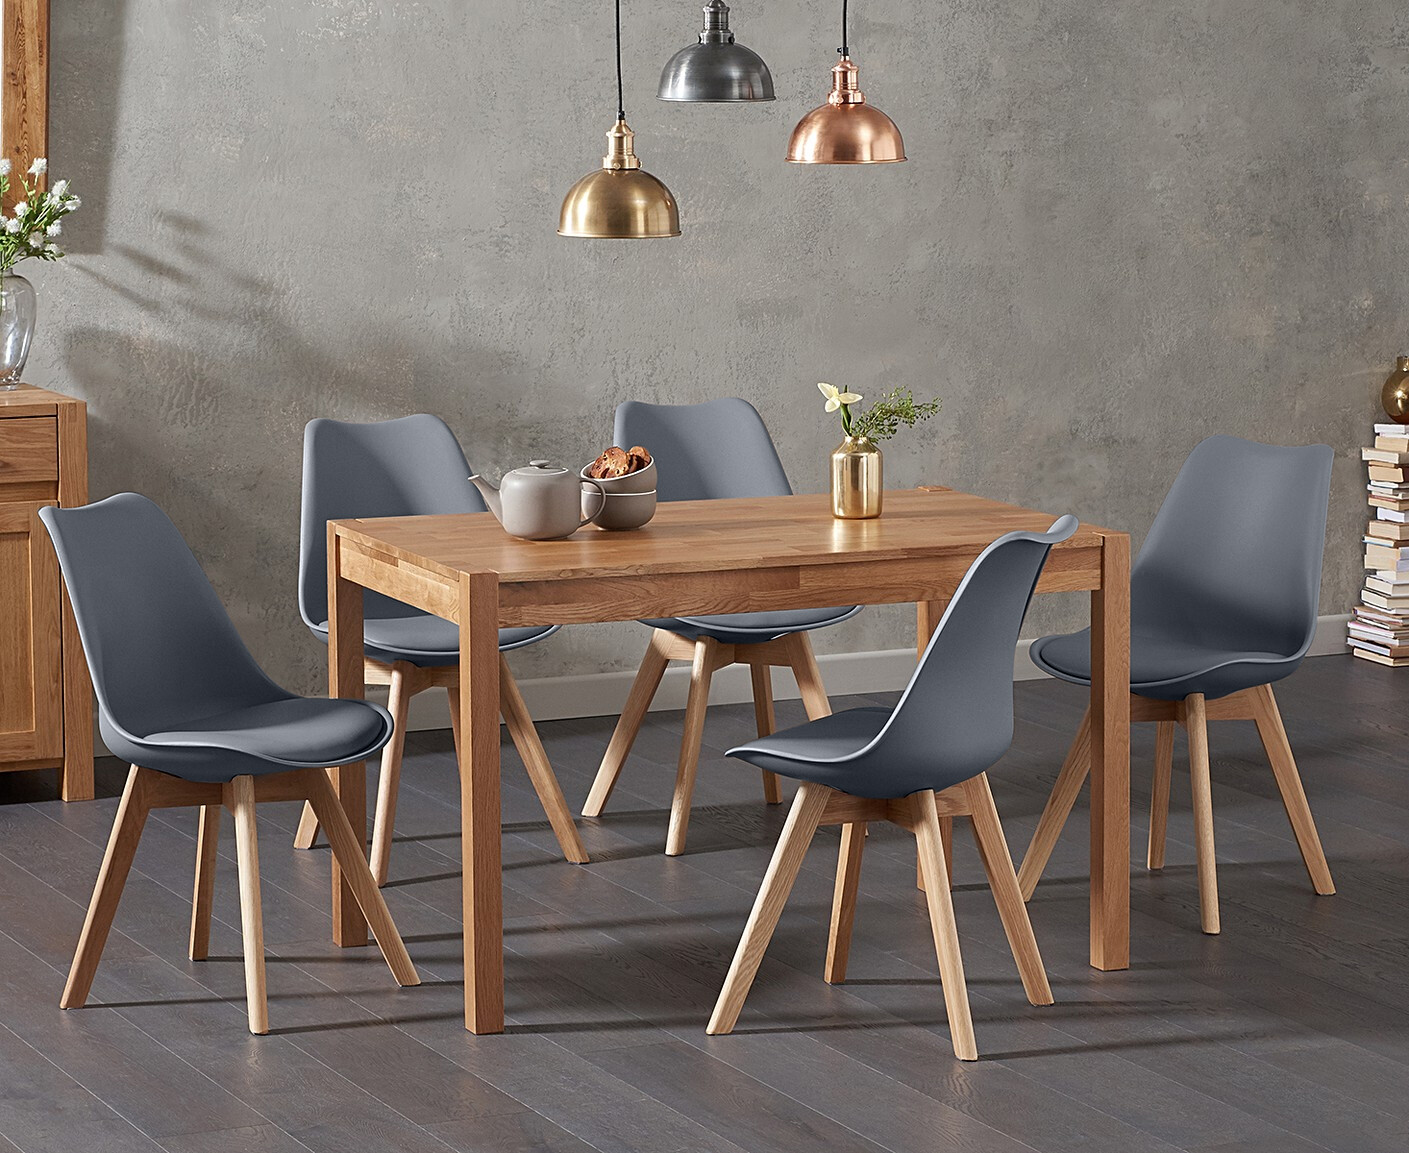 Photo 3 of York 120cm solid oak dining table with 6 light grey orson chairs